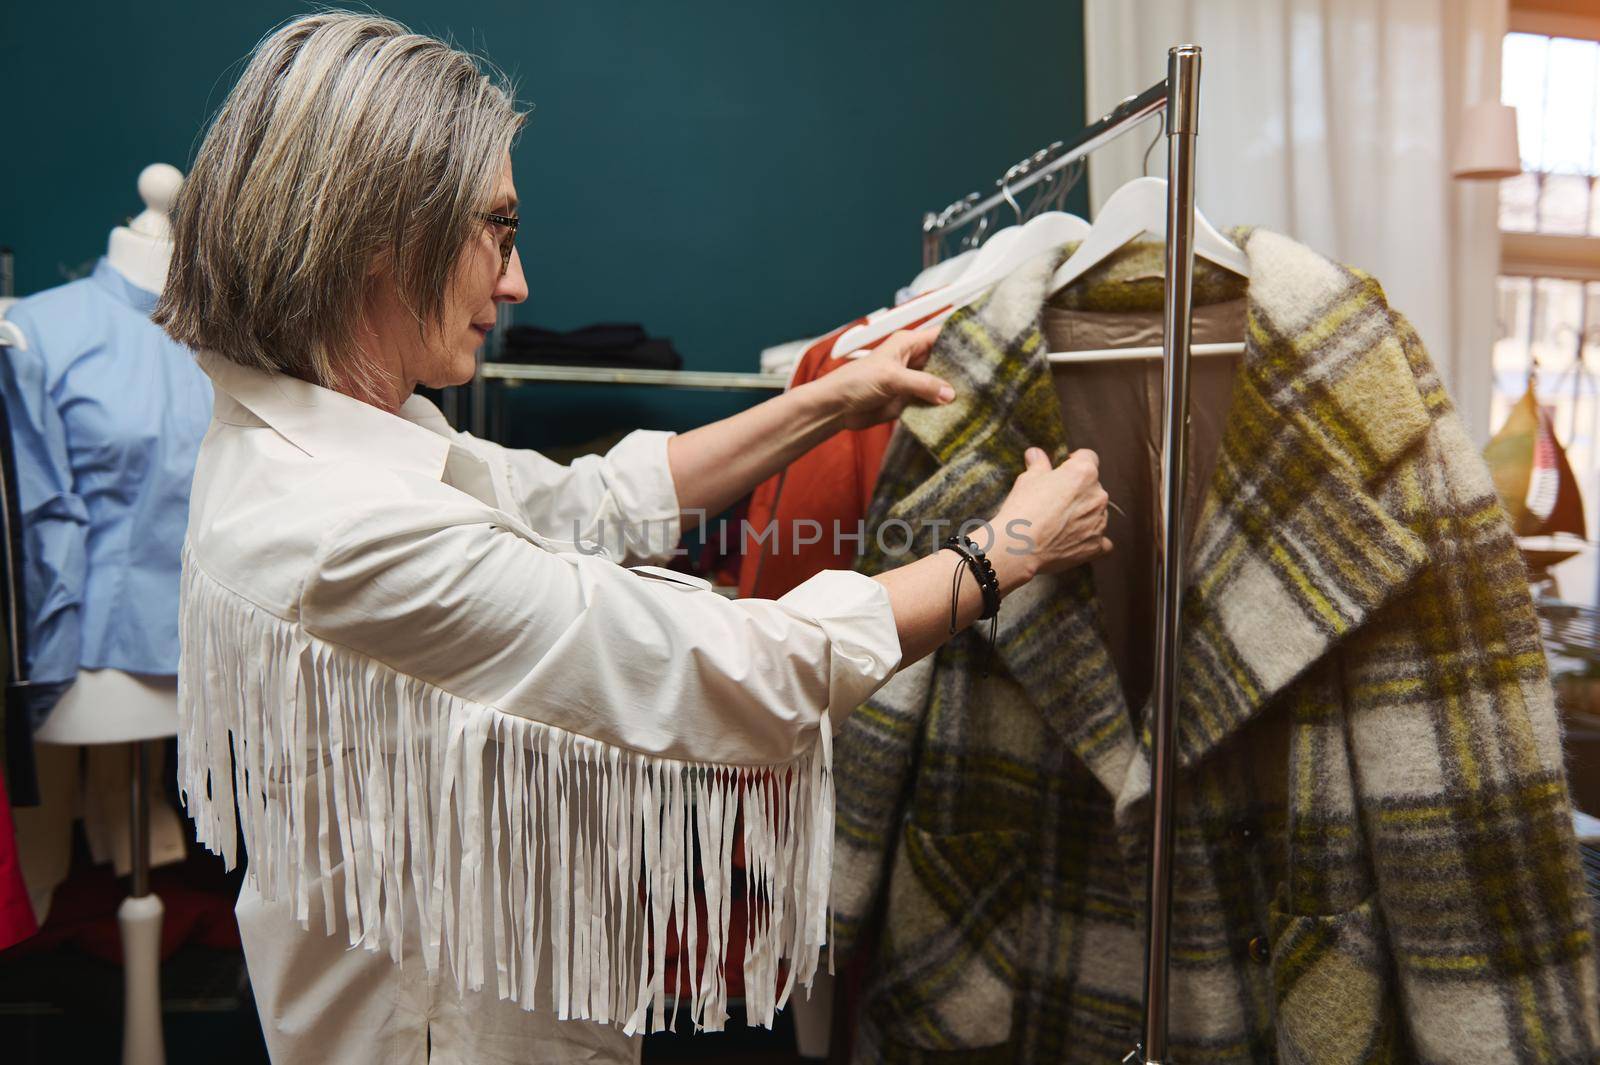 European mature woman, trendy fashion designer, tailor, seamstress standing in a garment storeroom, looking through the hangers with clothes ready for alteration. by artgf